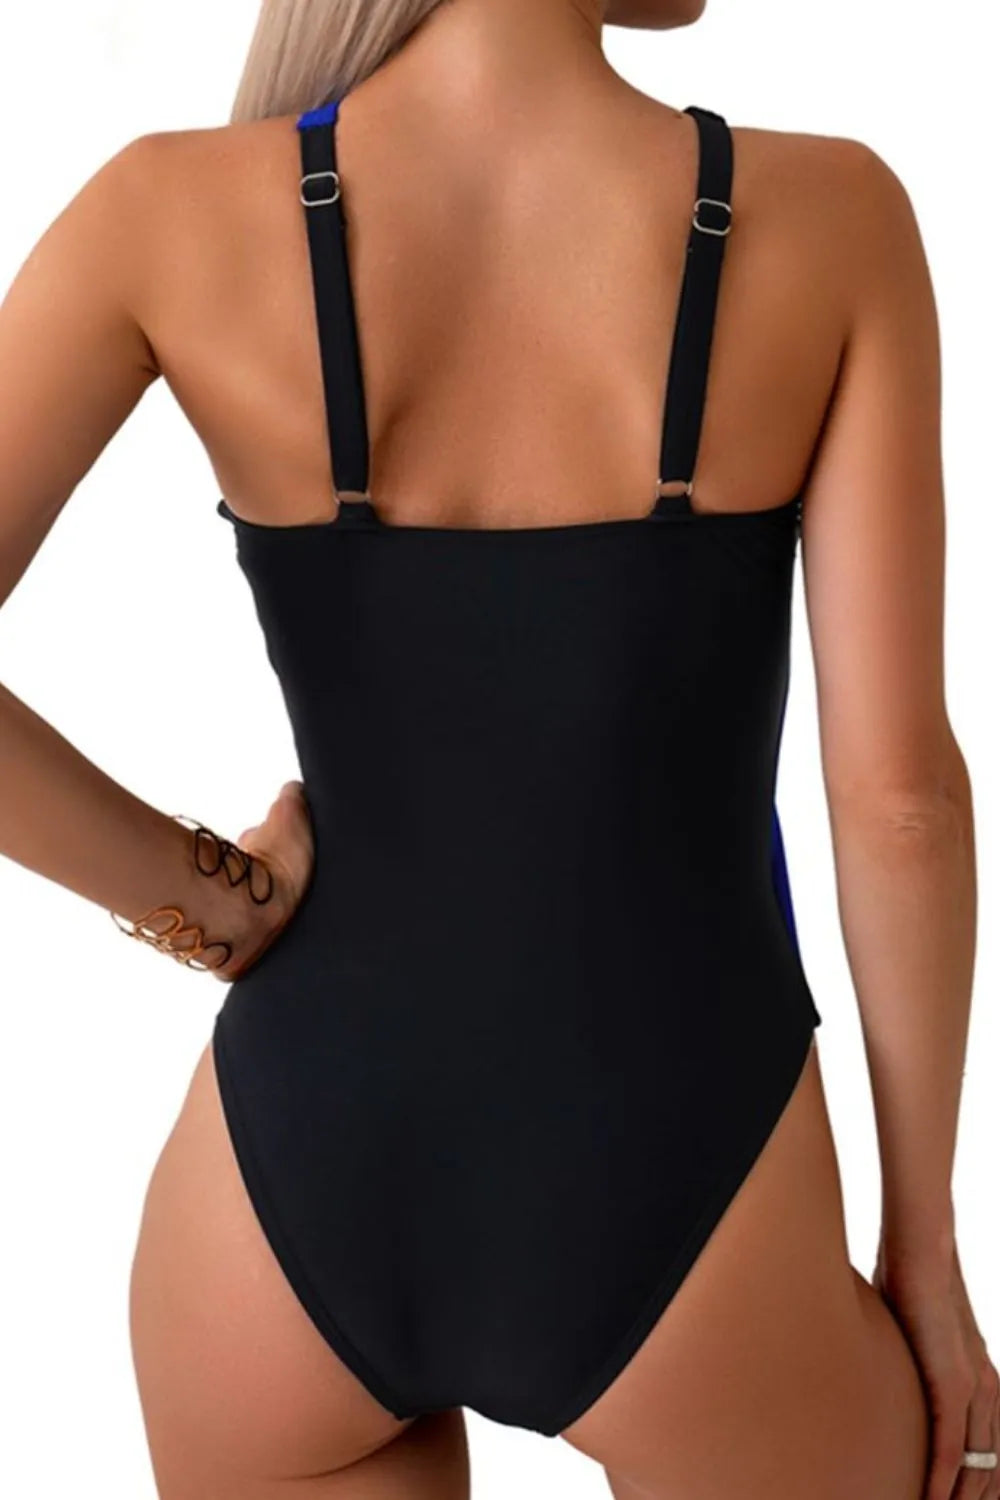 Discover elegance & comfort with our Cutout One-Piece Swimwear. Perfect for making a splash with bold colors and a flattering fit. Shop now!